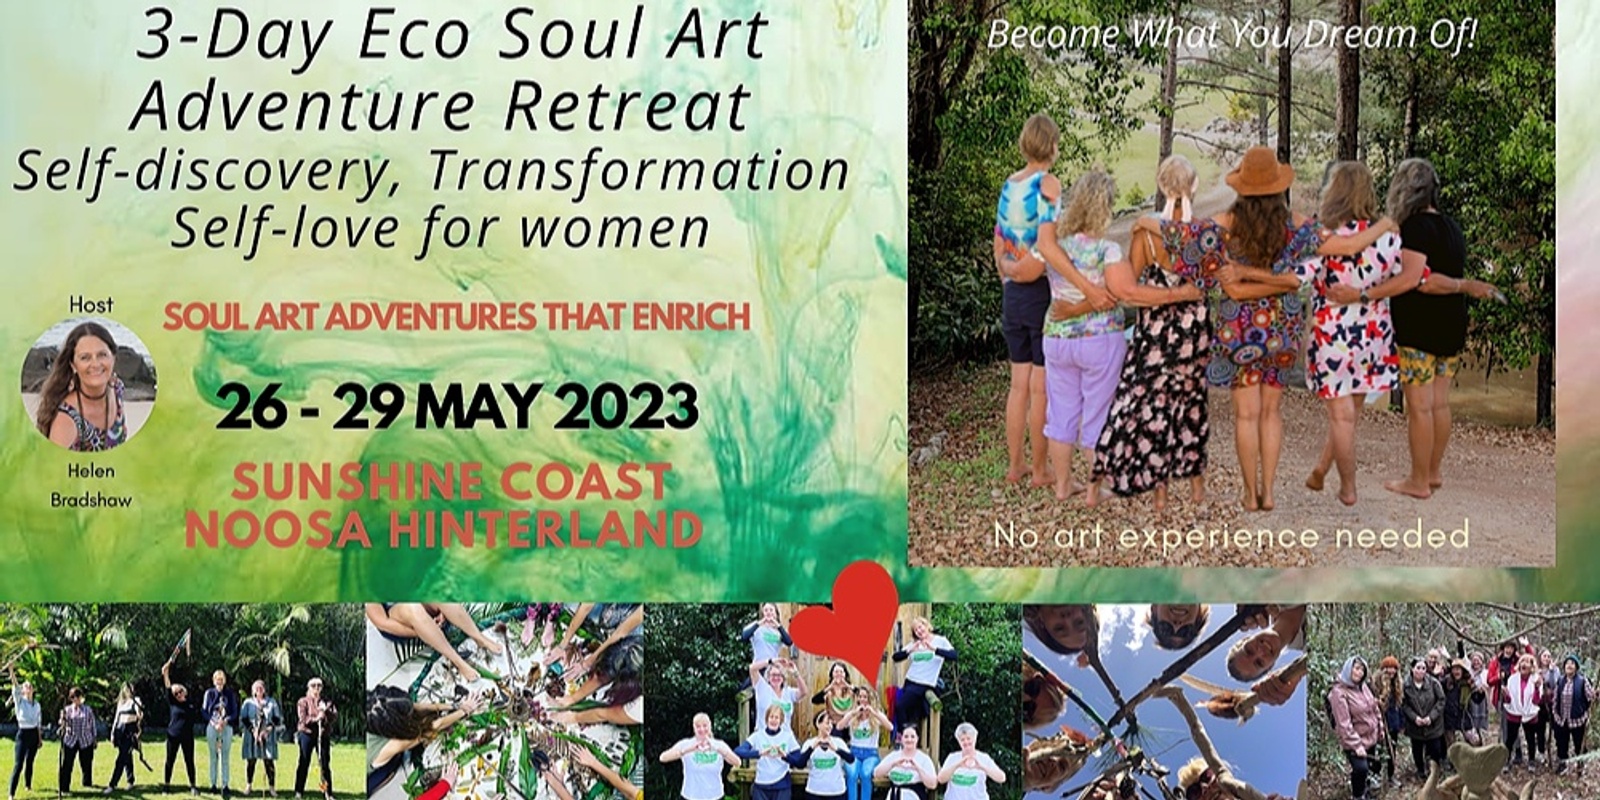 Banner image for 3 Night Eco Creative Expression Soul Art Adventure Retreat of Self-discovery, Transformation & Self-love for women. No art experience needed 